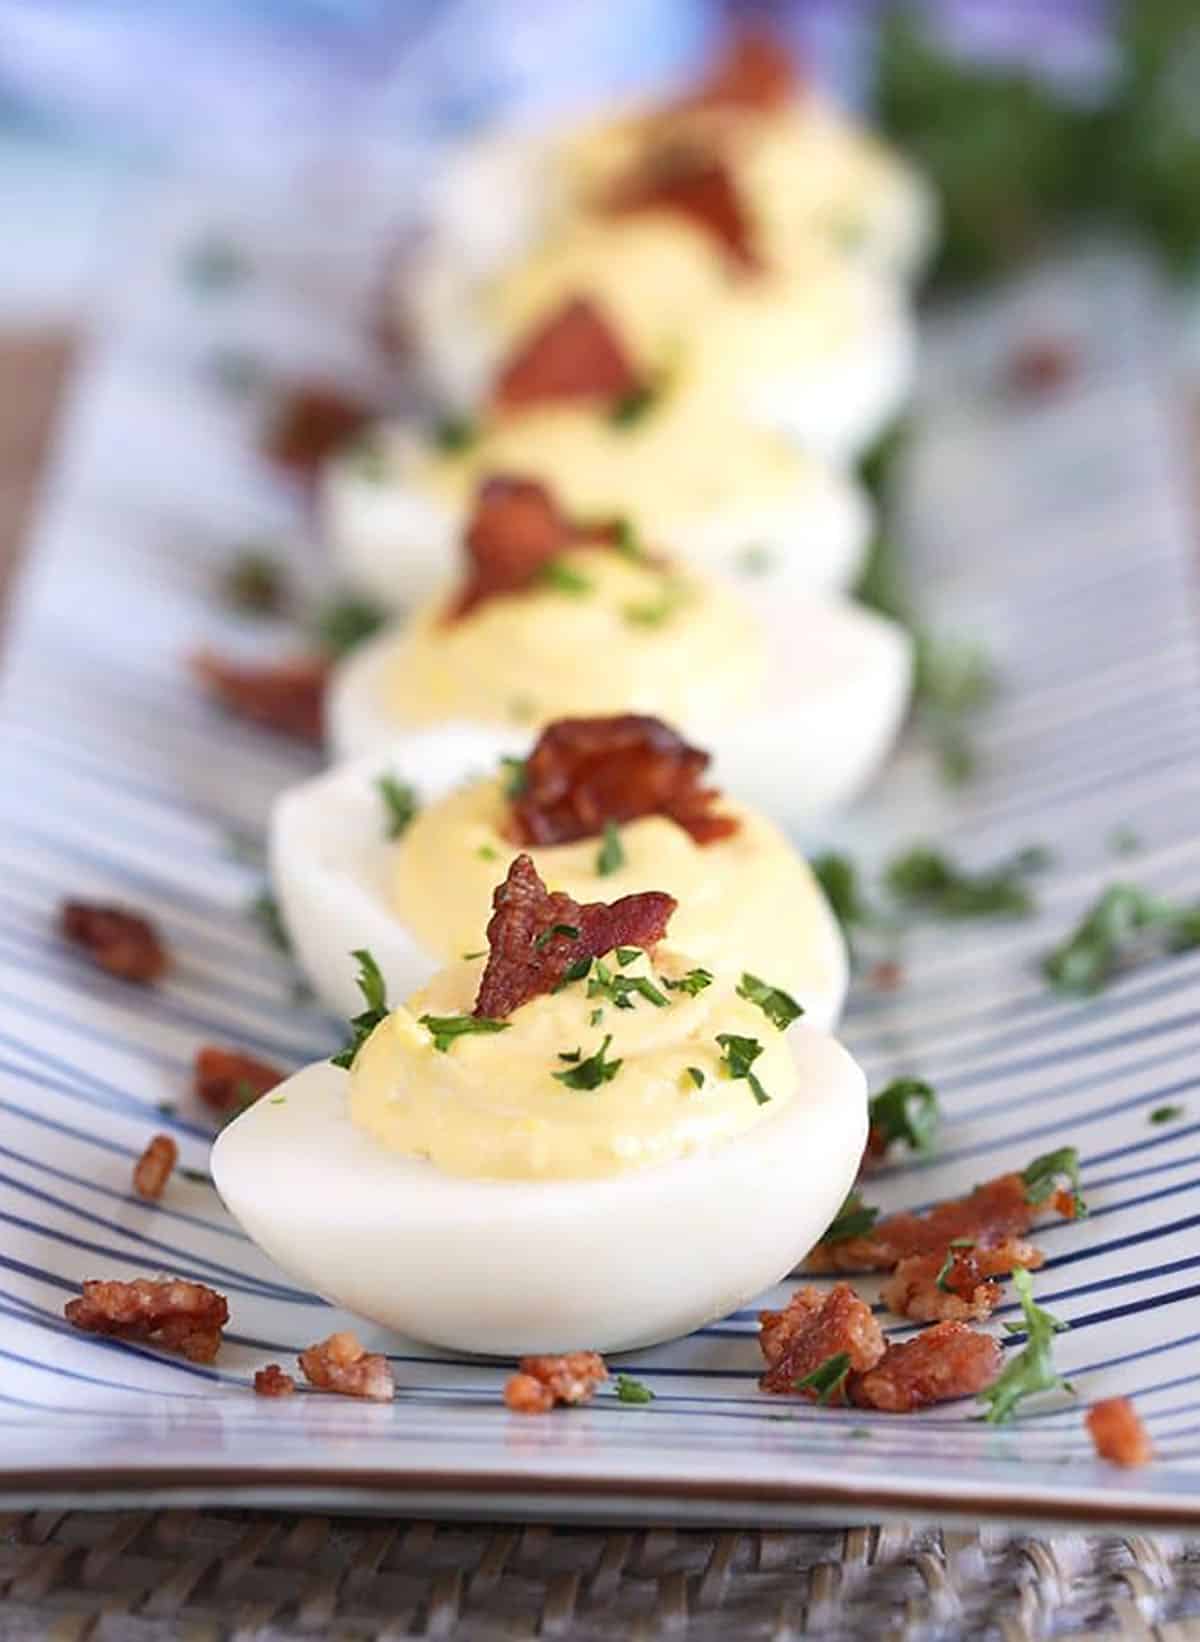 Bacon Horseradish Deviled Eggs in a row on a blue and white striped platter.